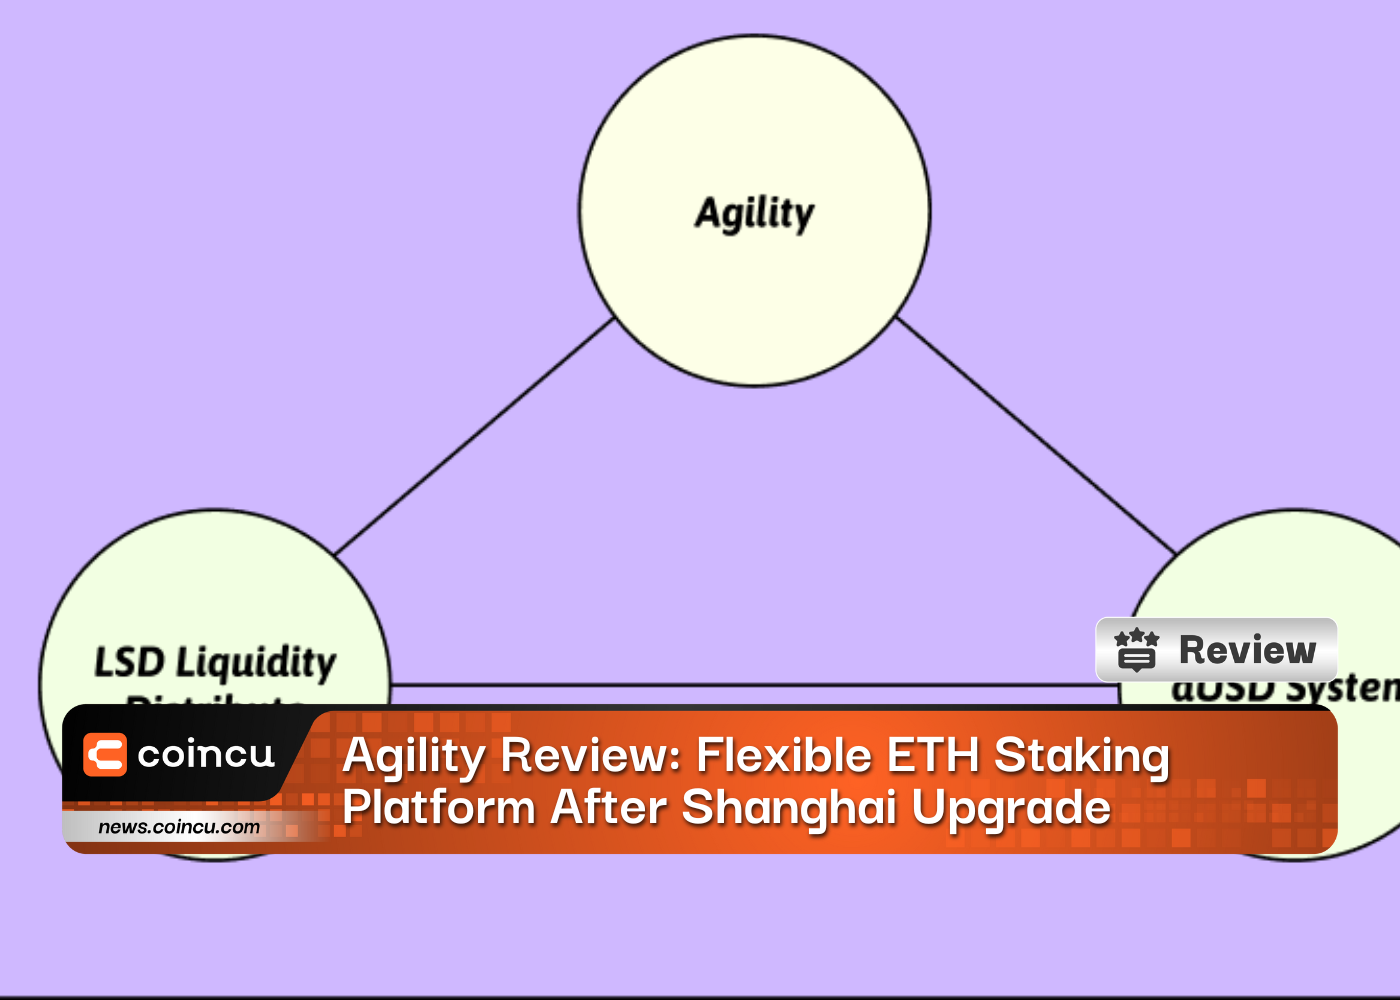 Agility Review: Flexible ETH Staking Platform After Shanghai Upgrade